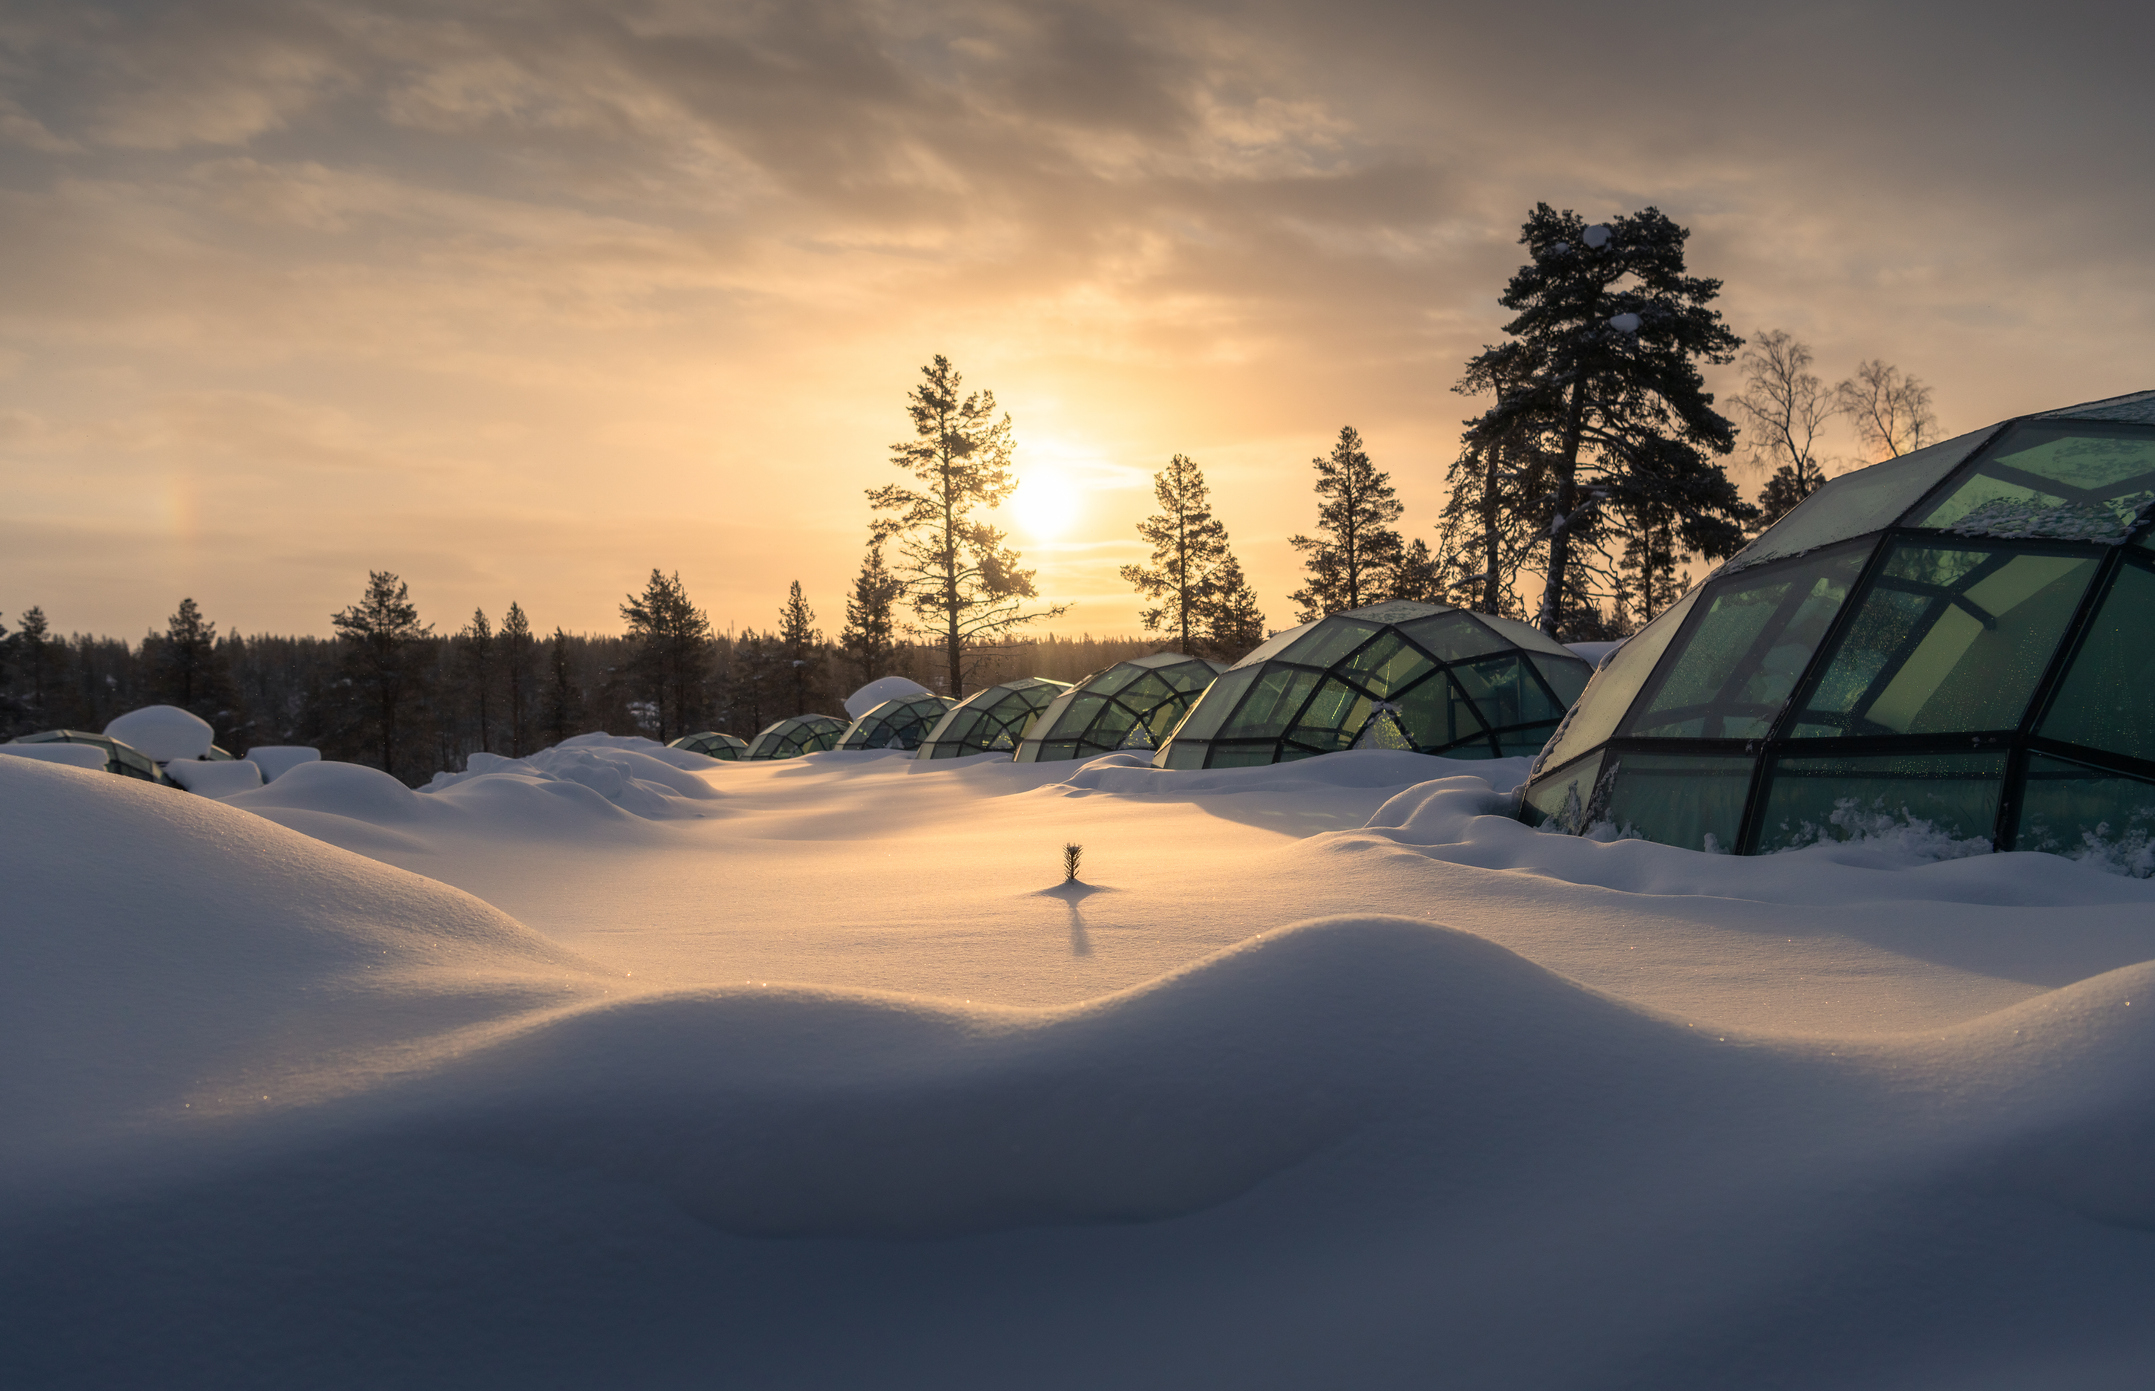 Glass igloos nestled in snow under a sunrise